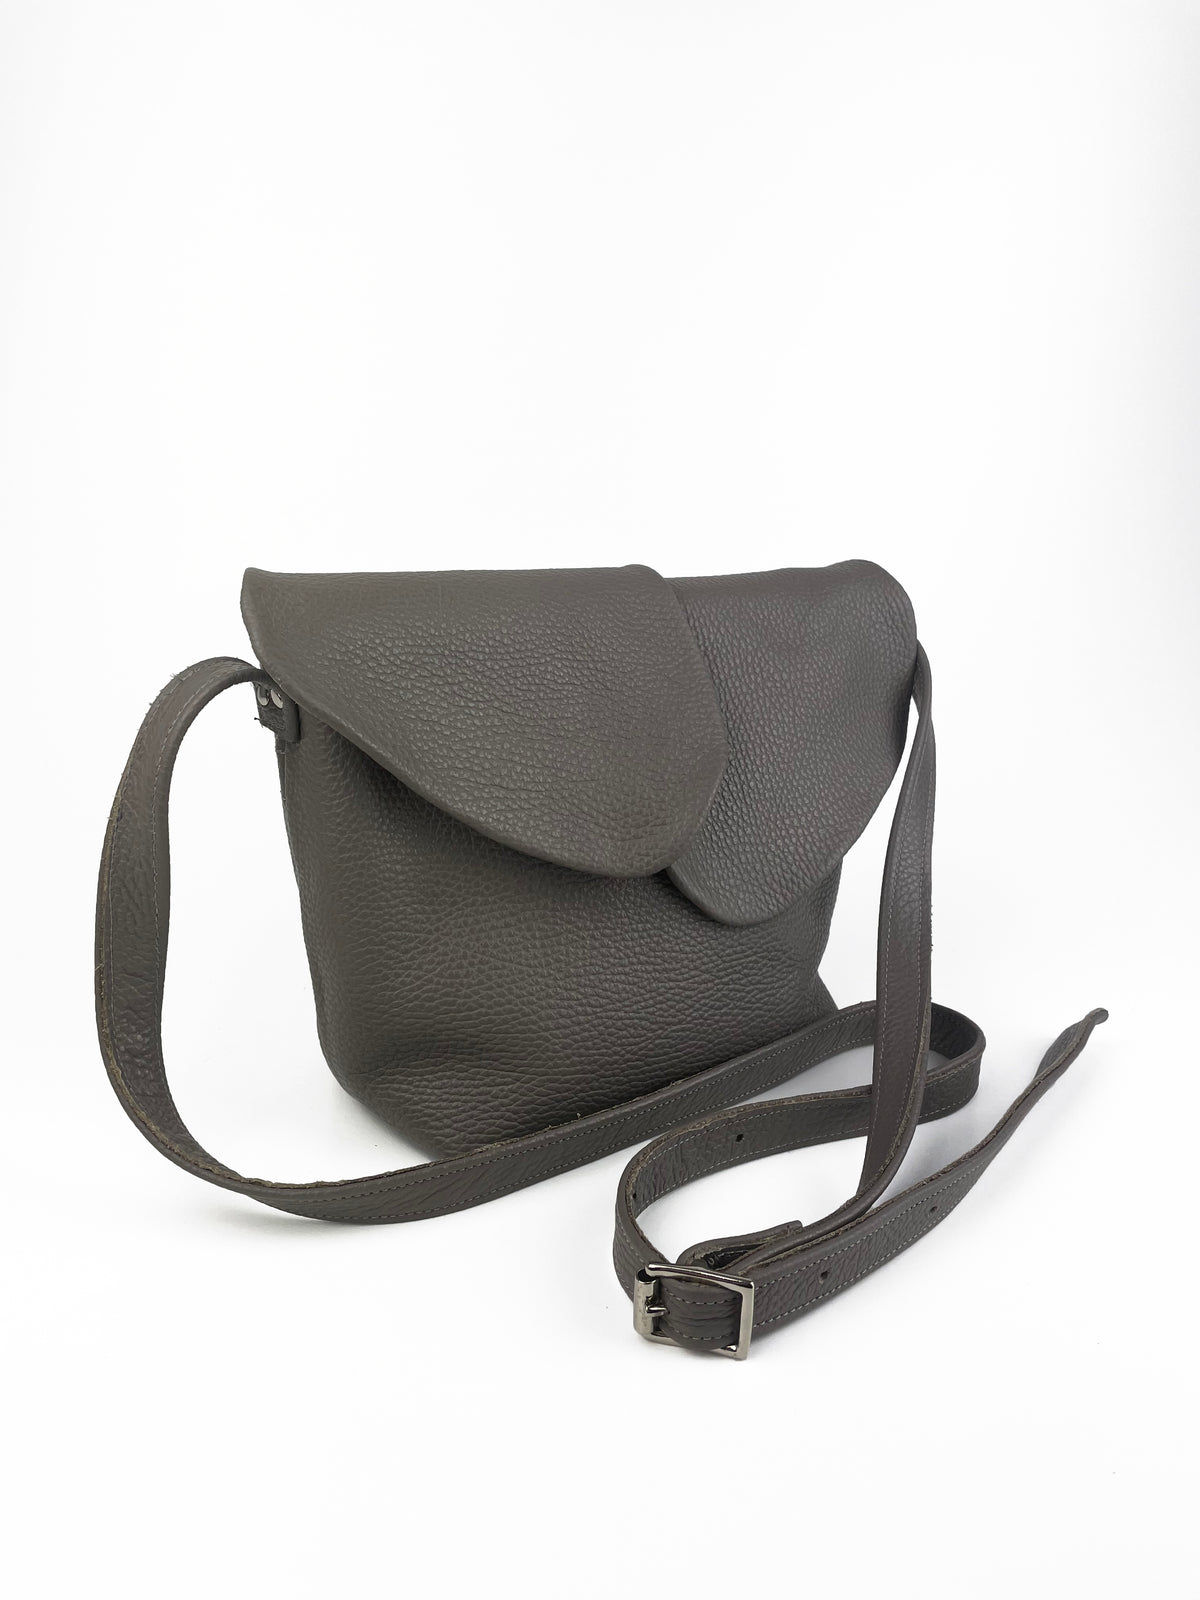 Petal Bag in Gray pebbled leather